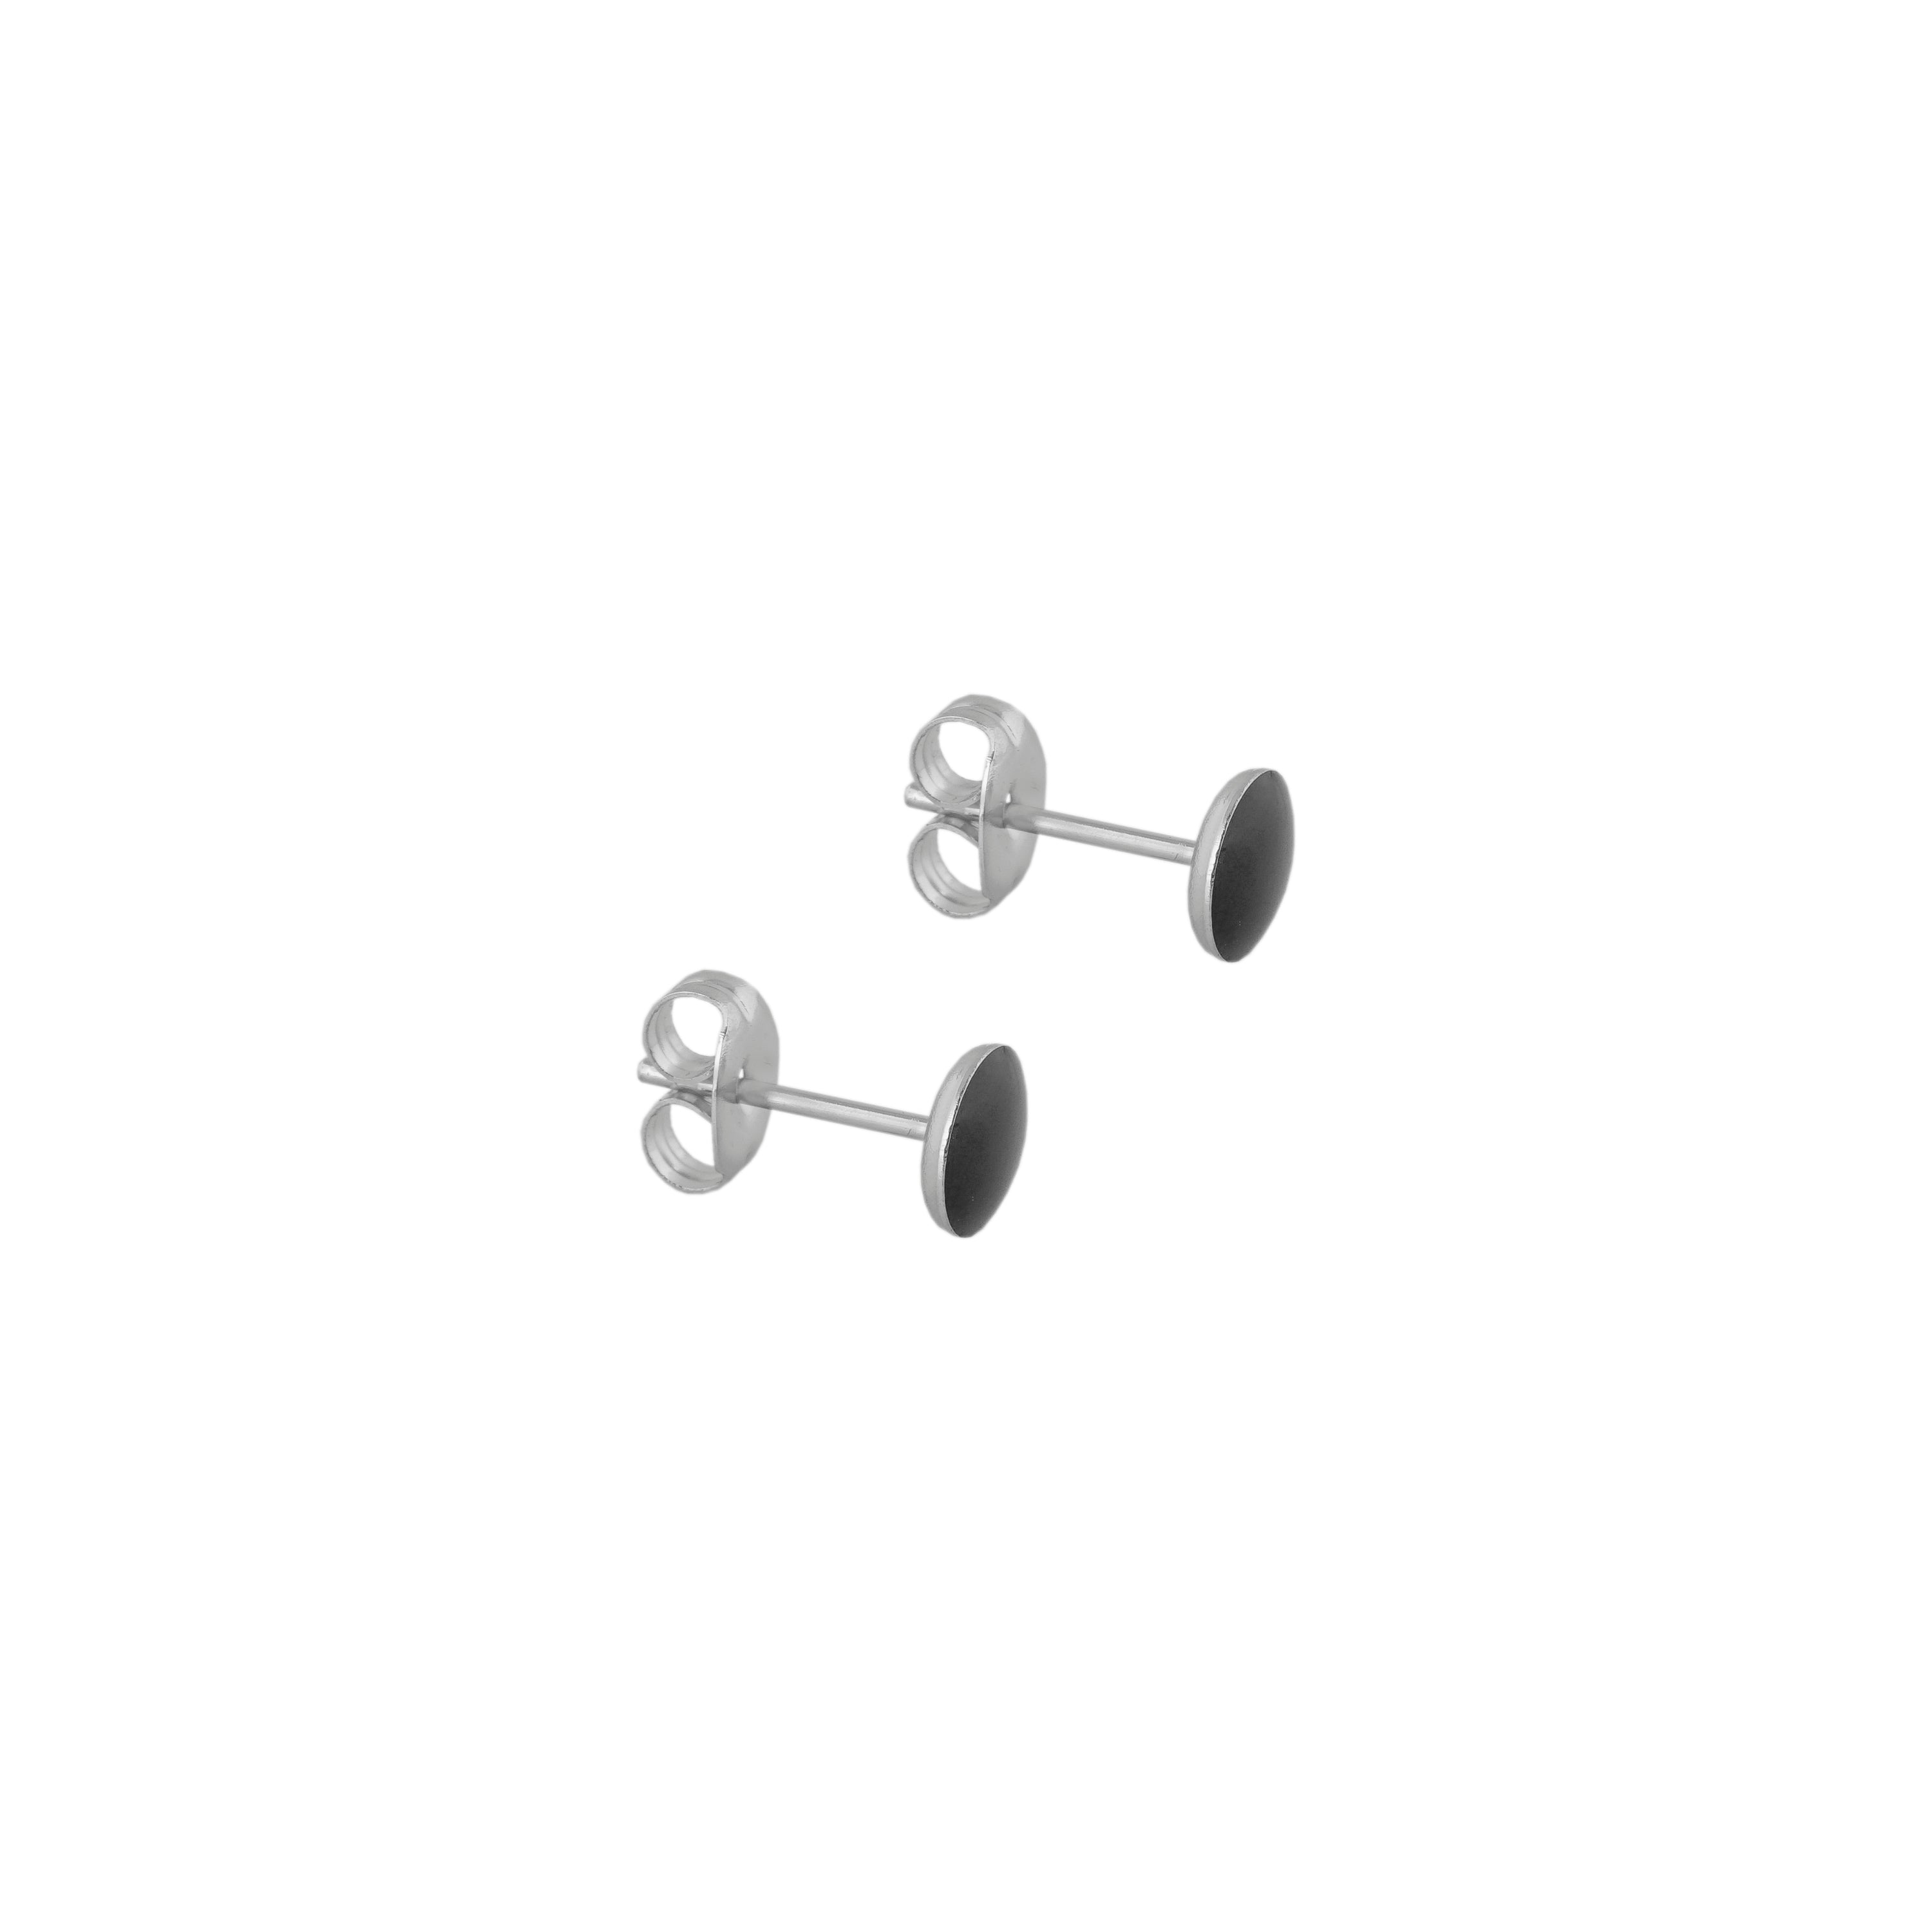 5MM Novelty Neon Black Allergy free Stainless Steel Ear Studs | MADE IN USA | Ideal for everyday wear